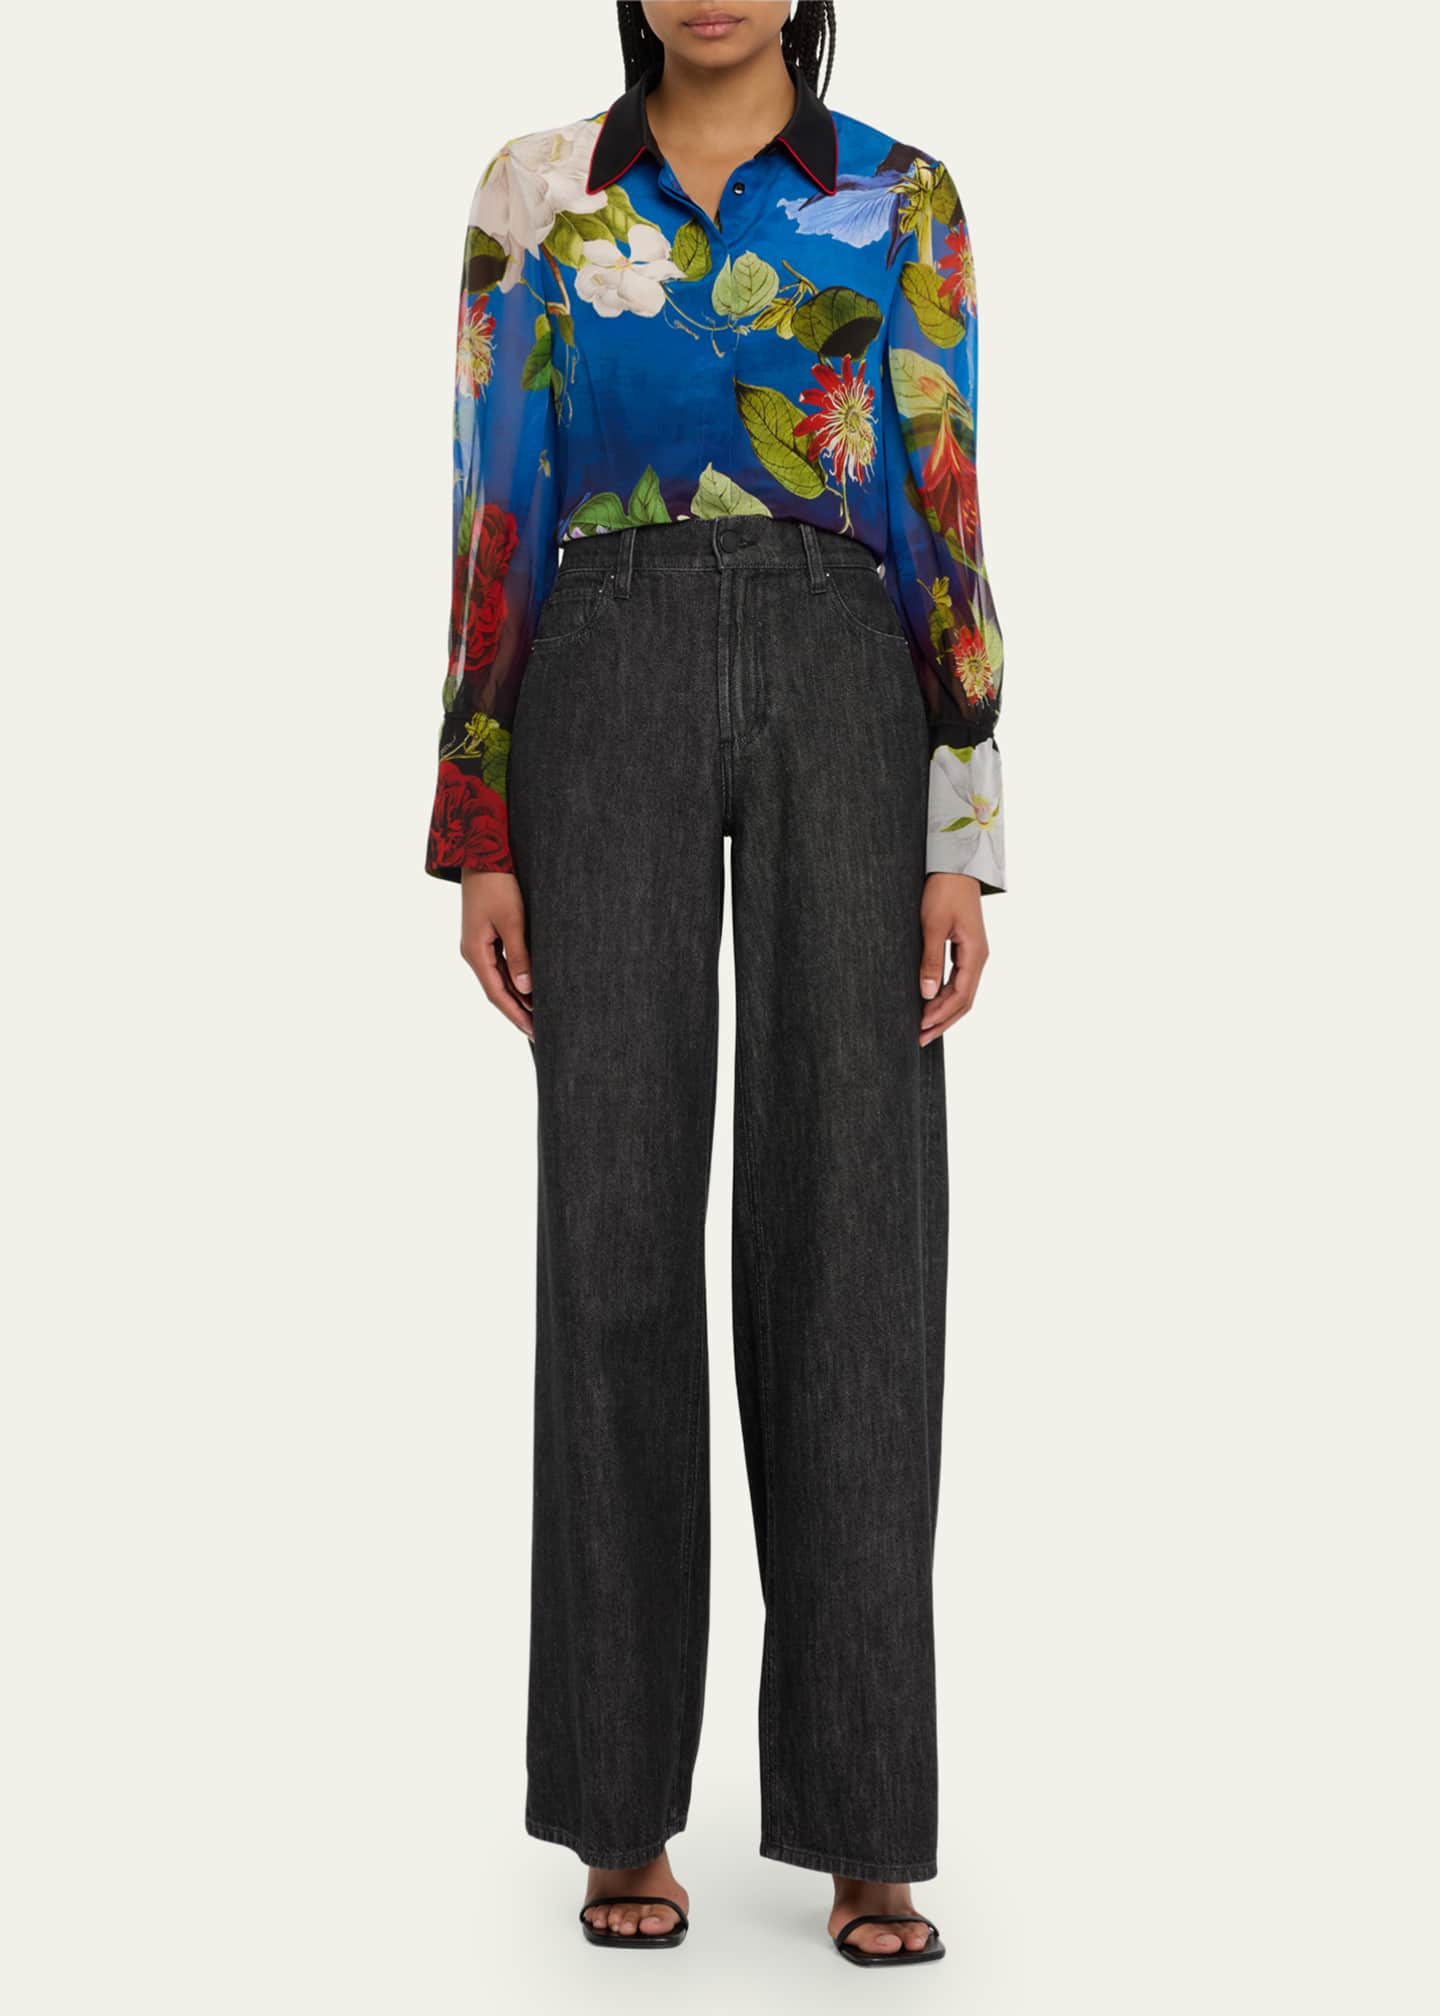 Alice + Olivia Wan Floral-Print Button-Front Blouse - Bergdorf Goodman